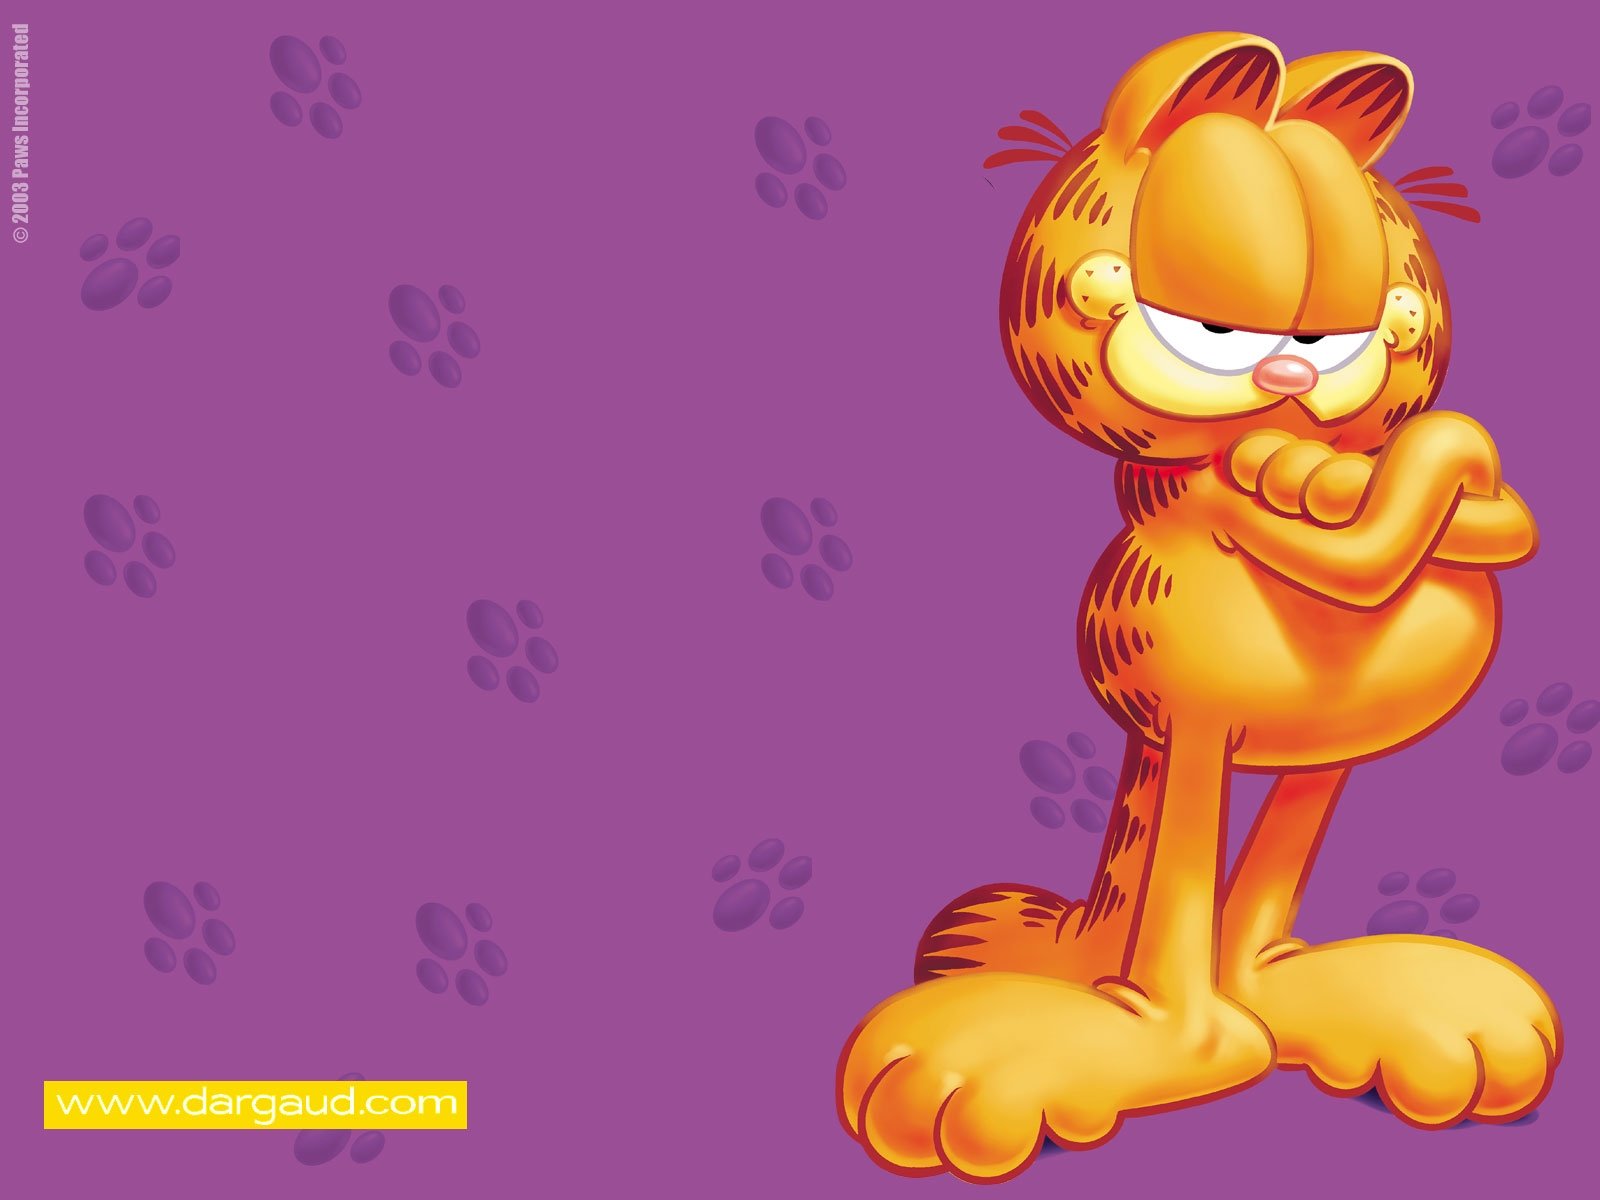 Garfield Pictures